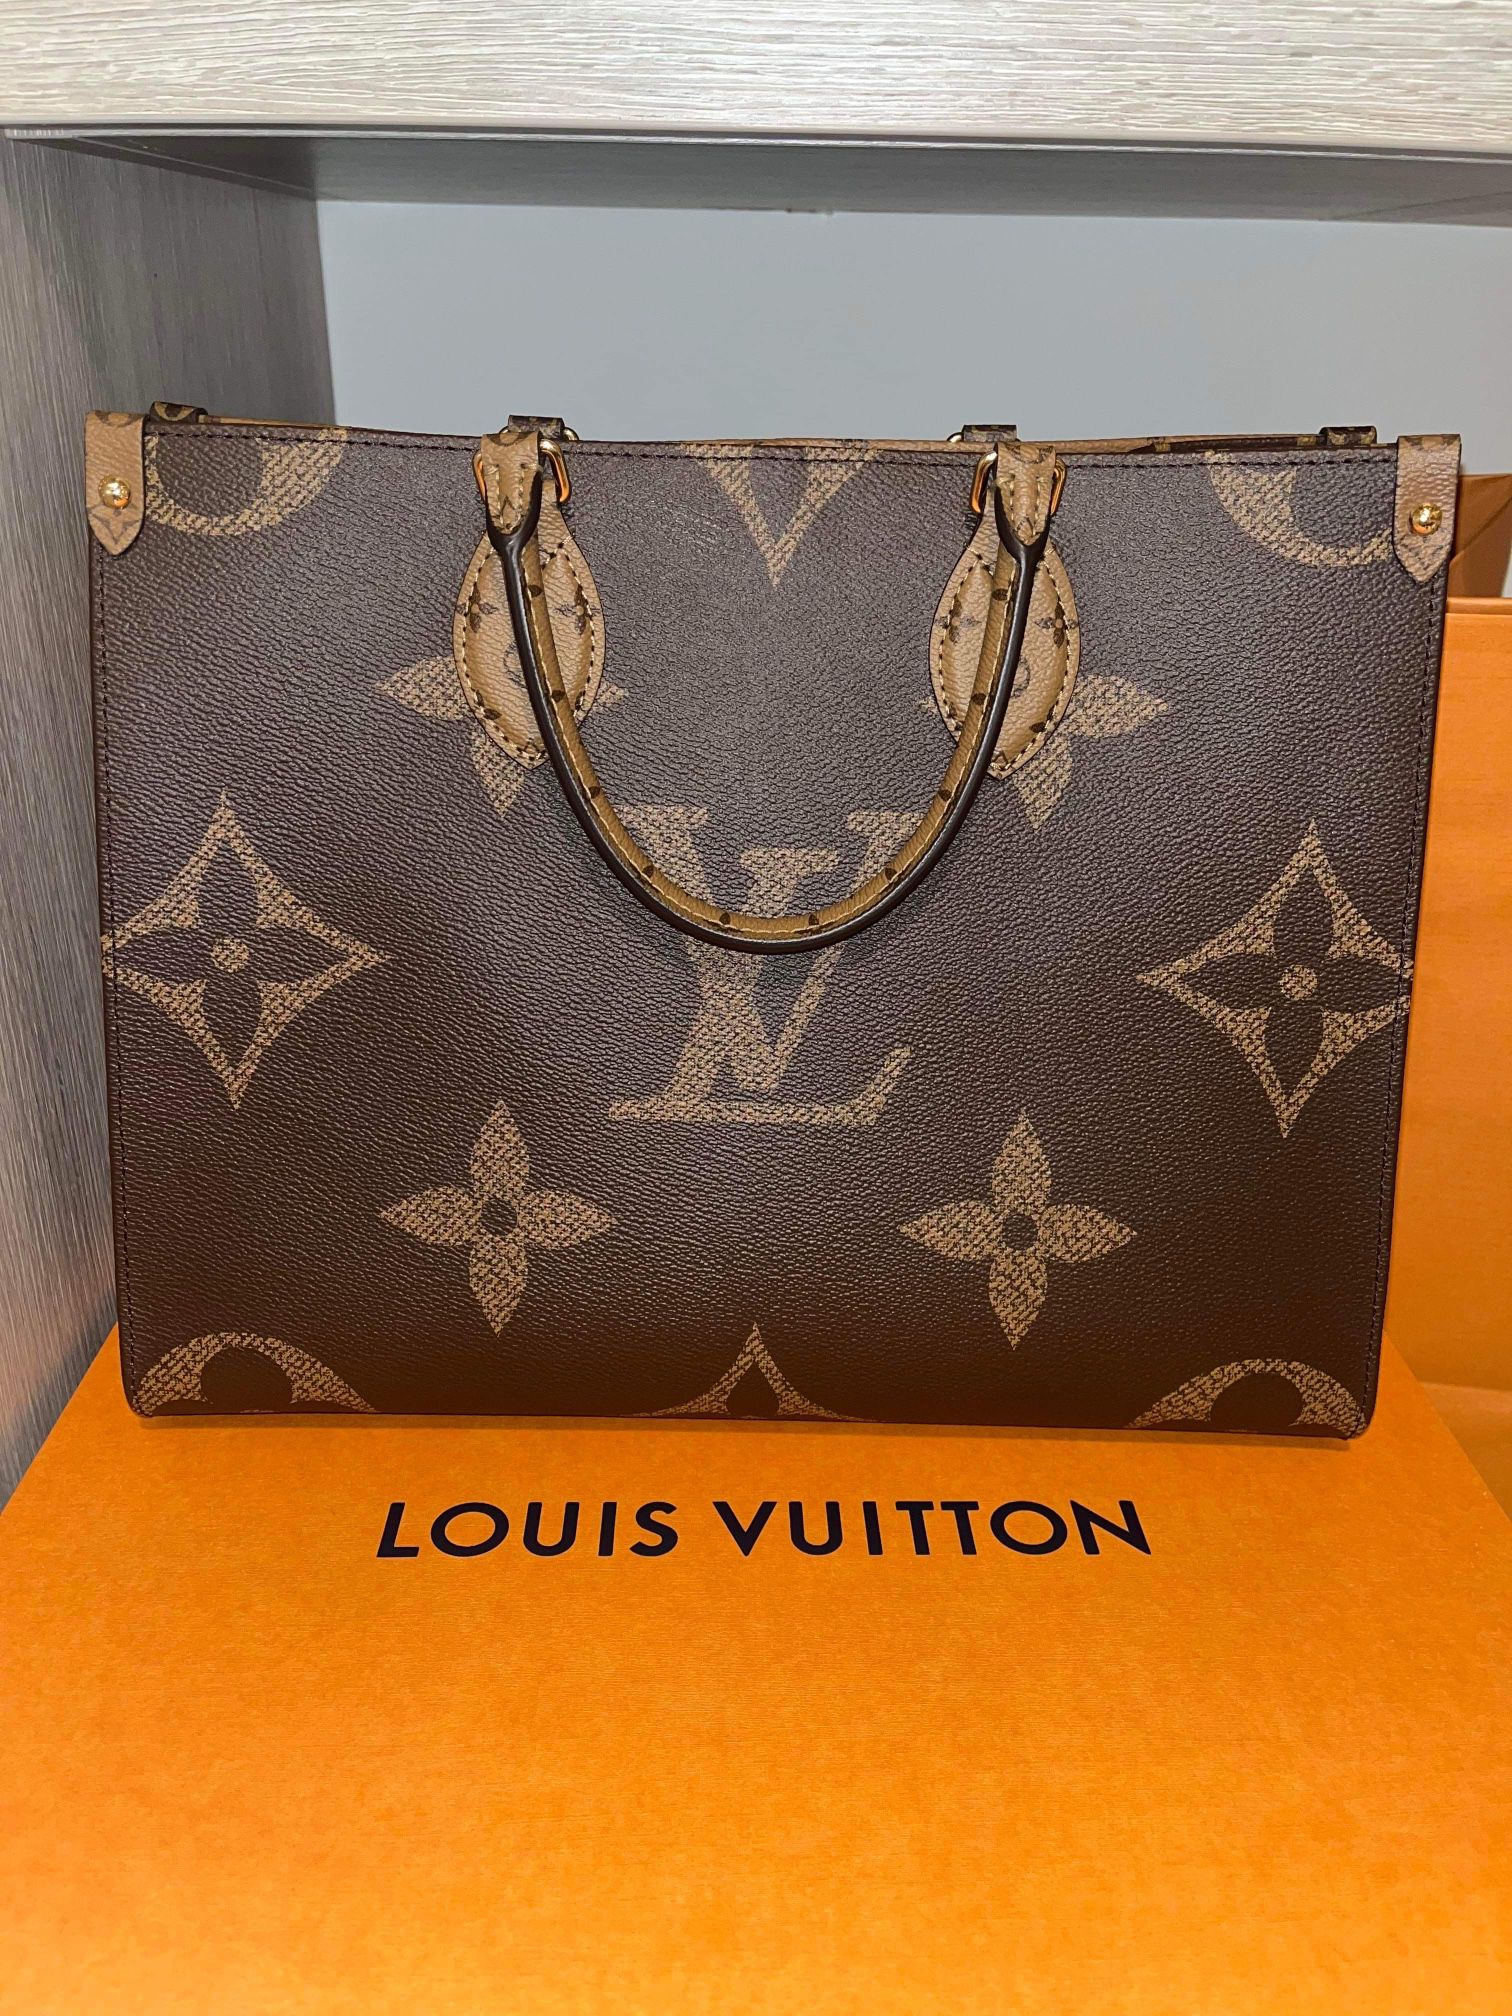 Louis Vuitton Armand backpack - Like new for Sale in New York, NY - OfferUp